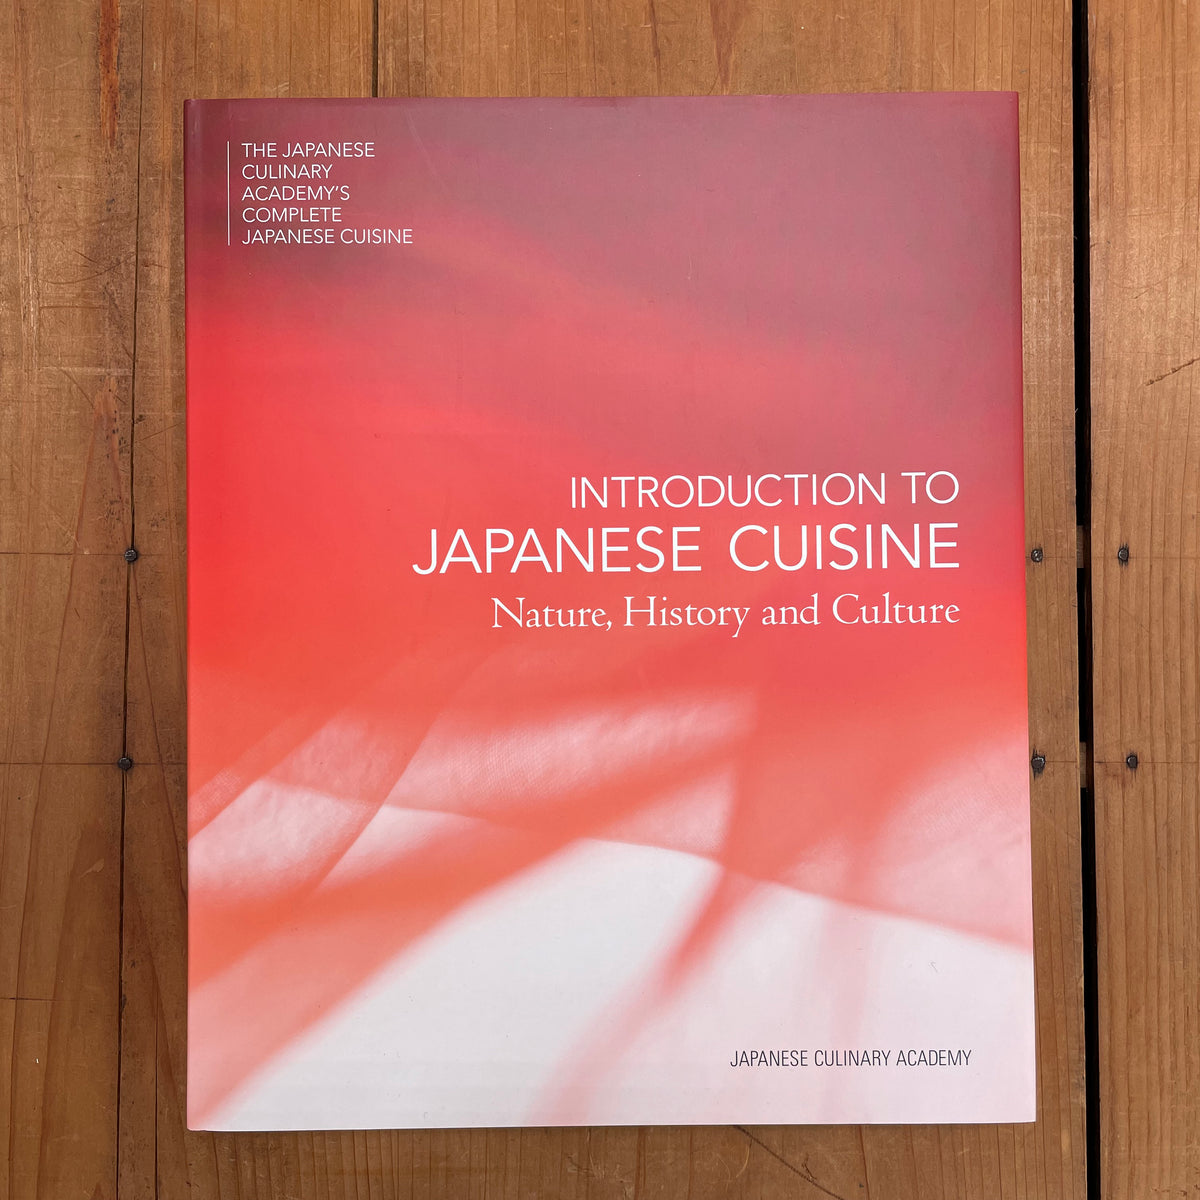 The Japanese Culinary Academy INTRODUCTION TO JAPANESE CUISINE: Nature, History and Culture